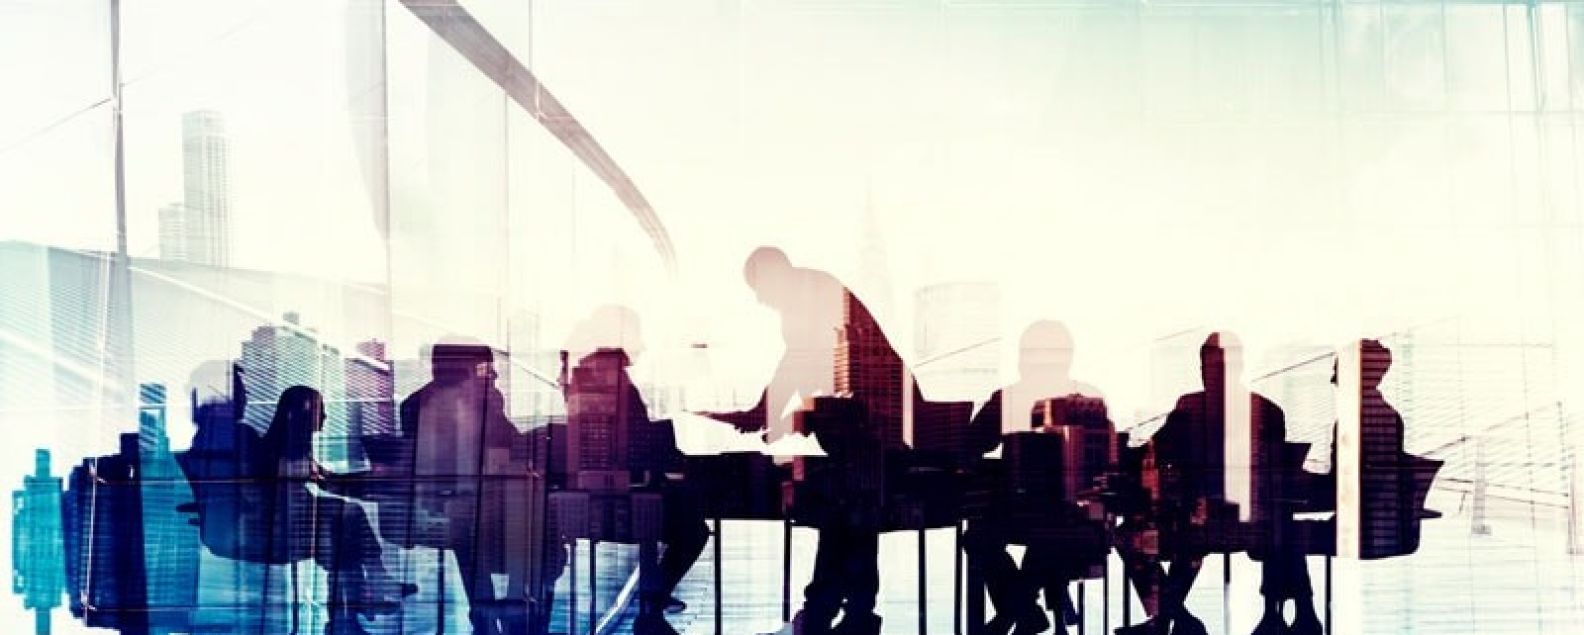 Abstract of silhouettes of business people in a meeting